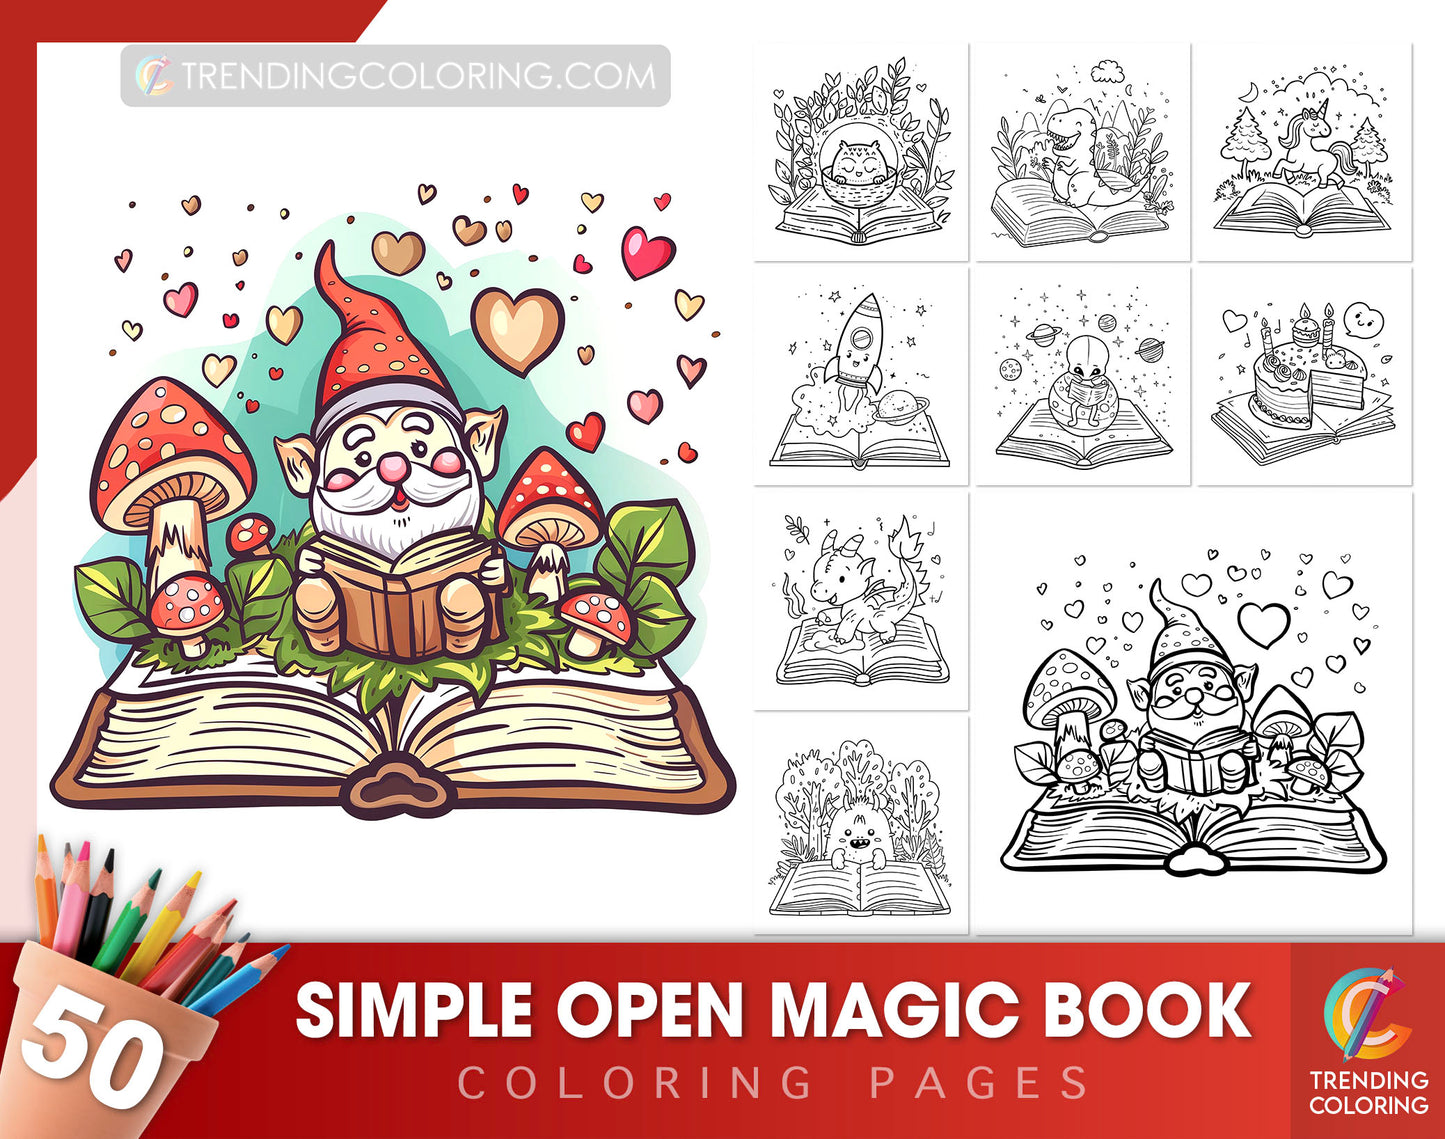 50 Simple Open Magic Book Coloring Pages - Instant Download - Printable